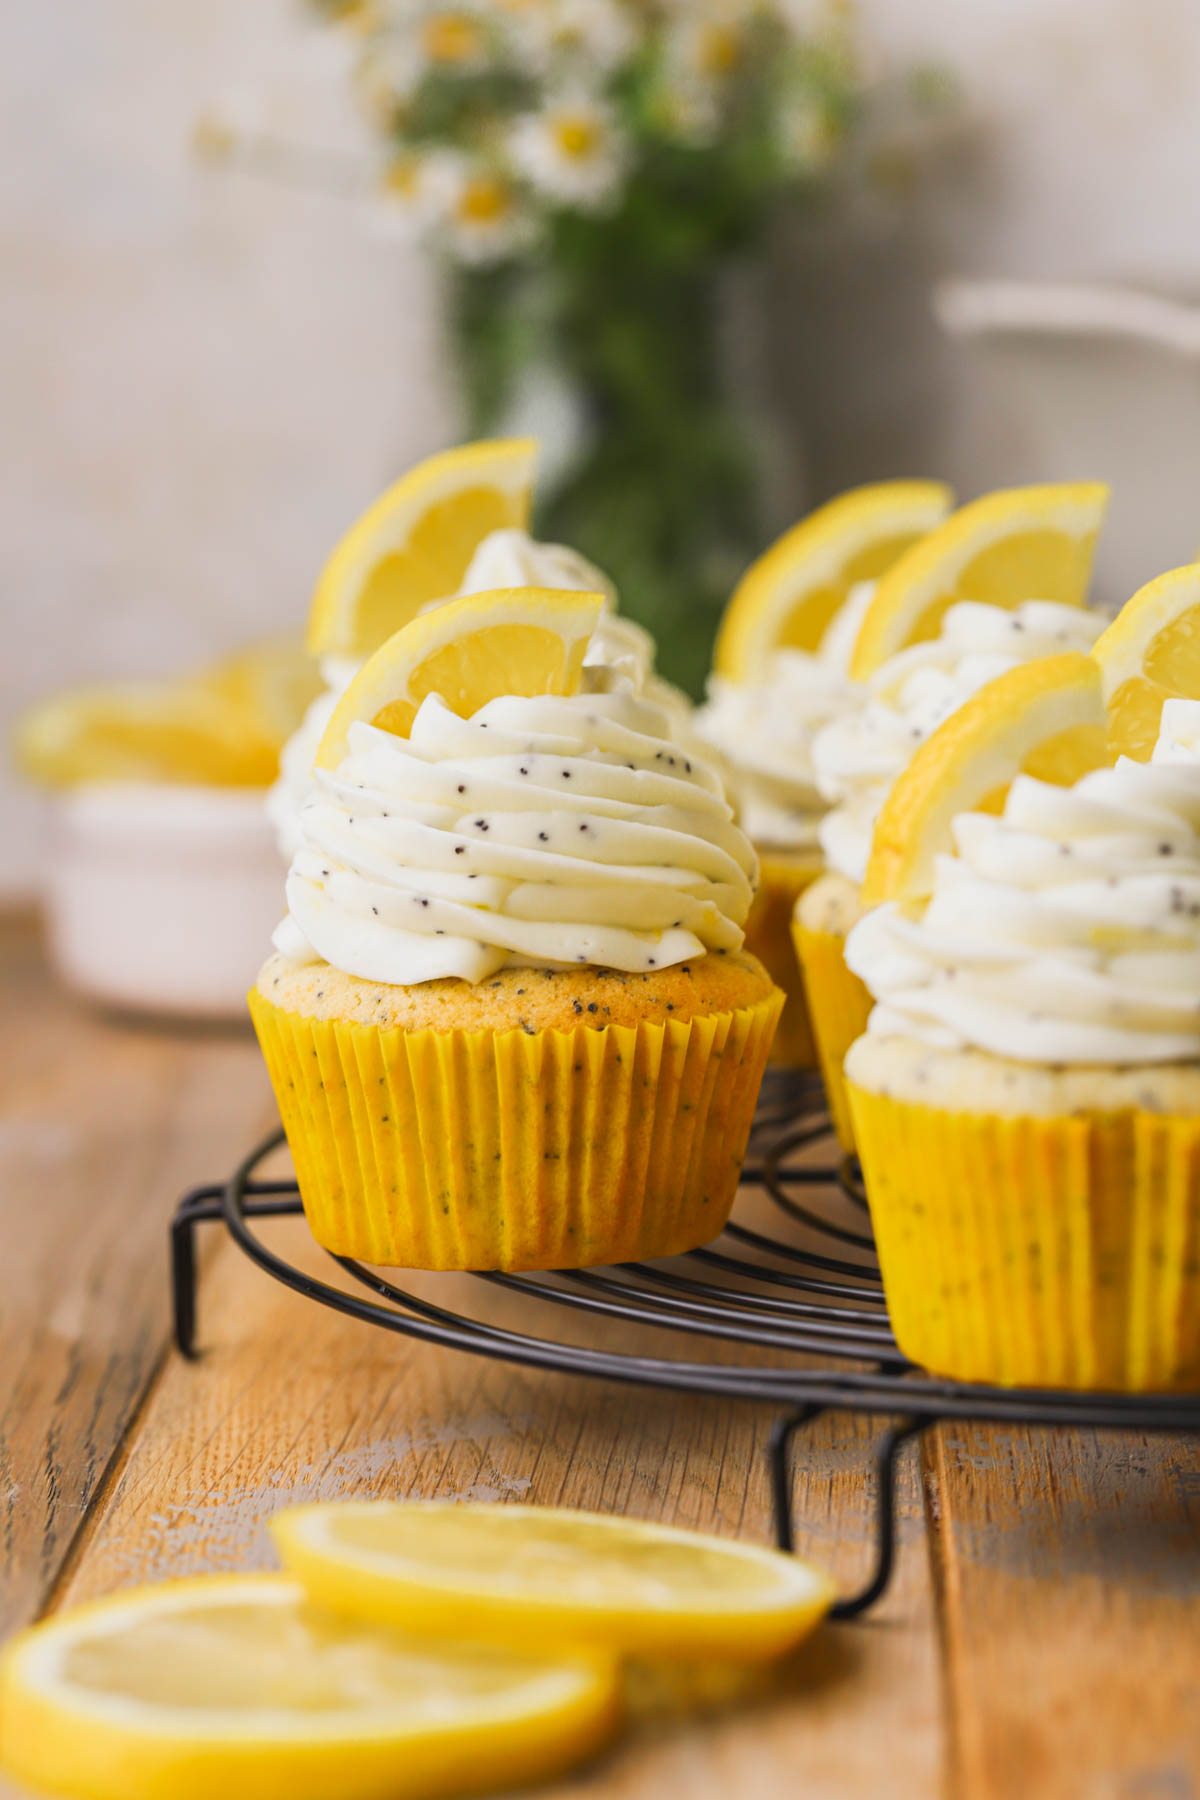 Lemon cupcakes with poppyseeds and cream cheese frosting.  